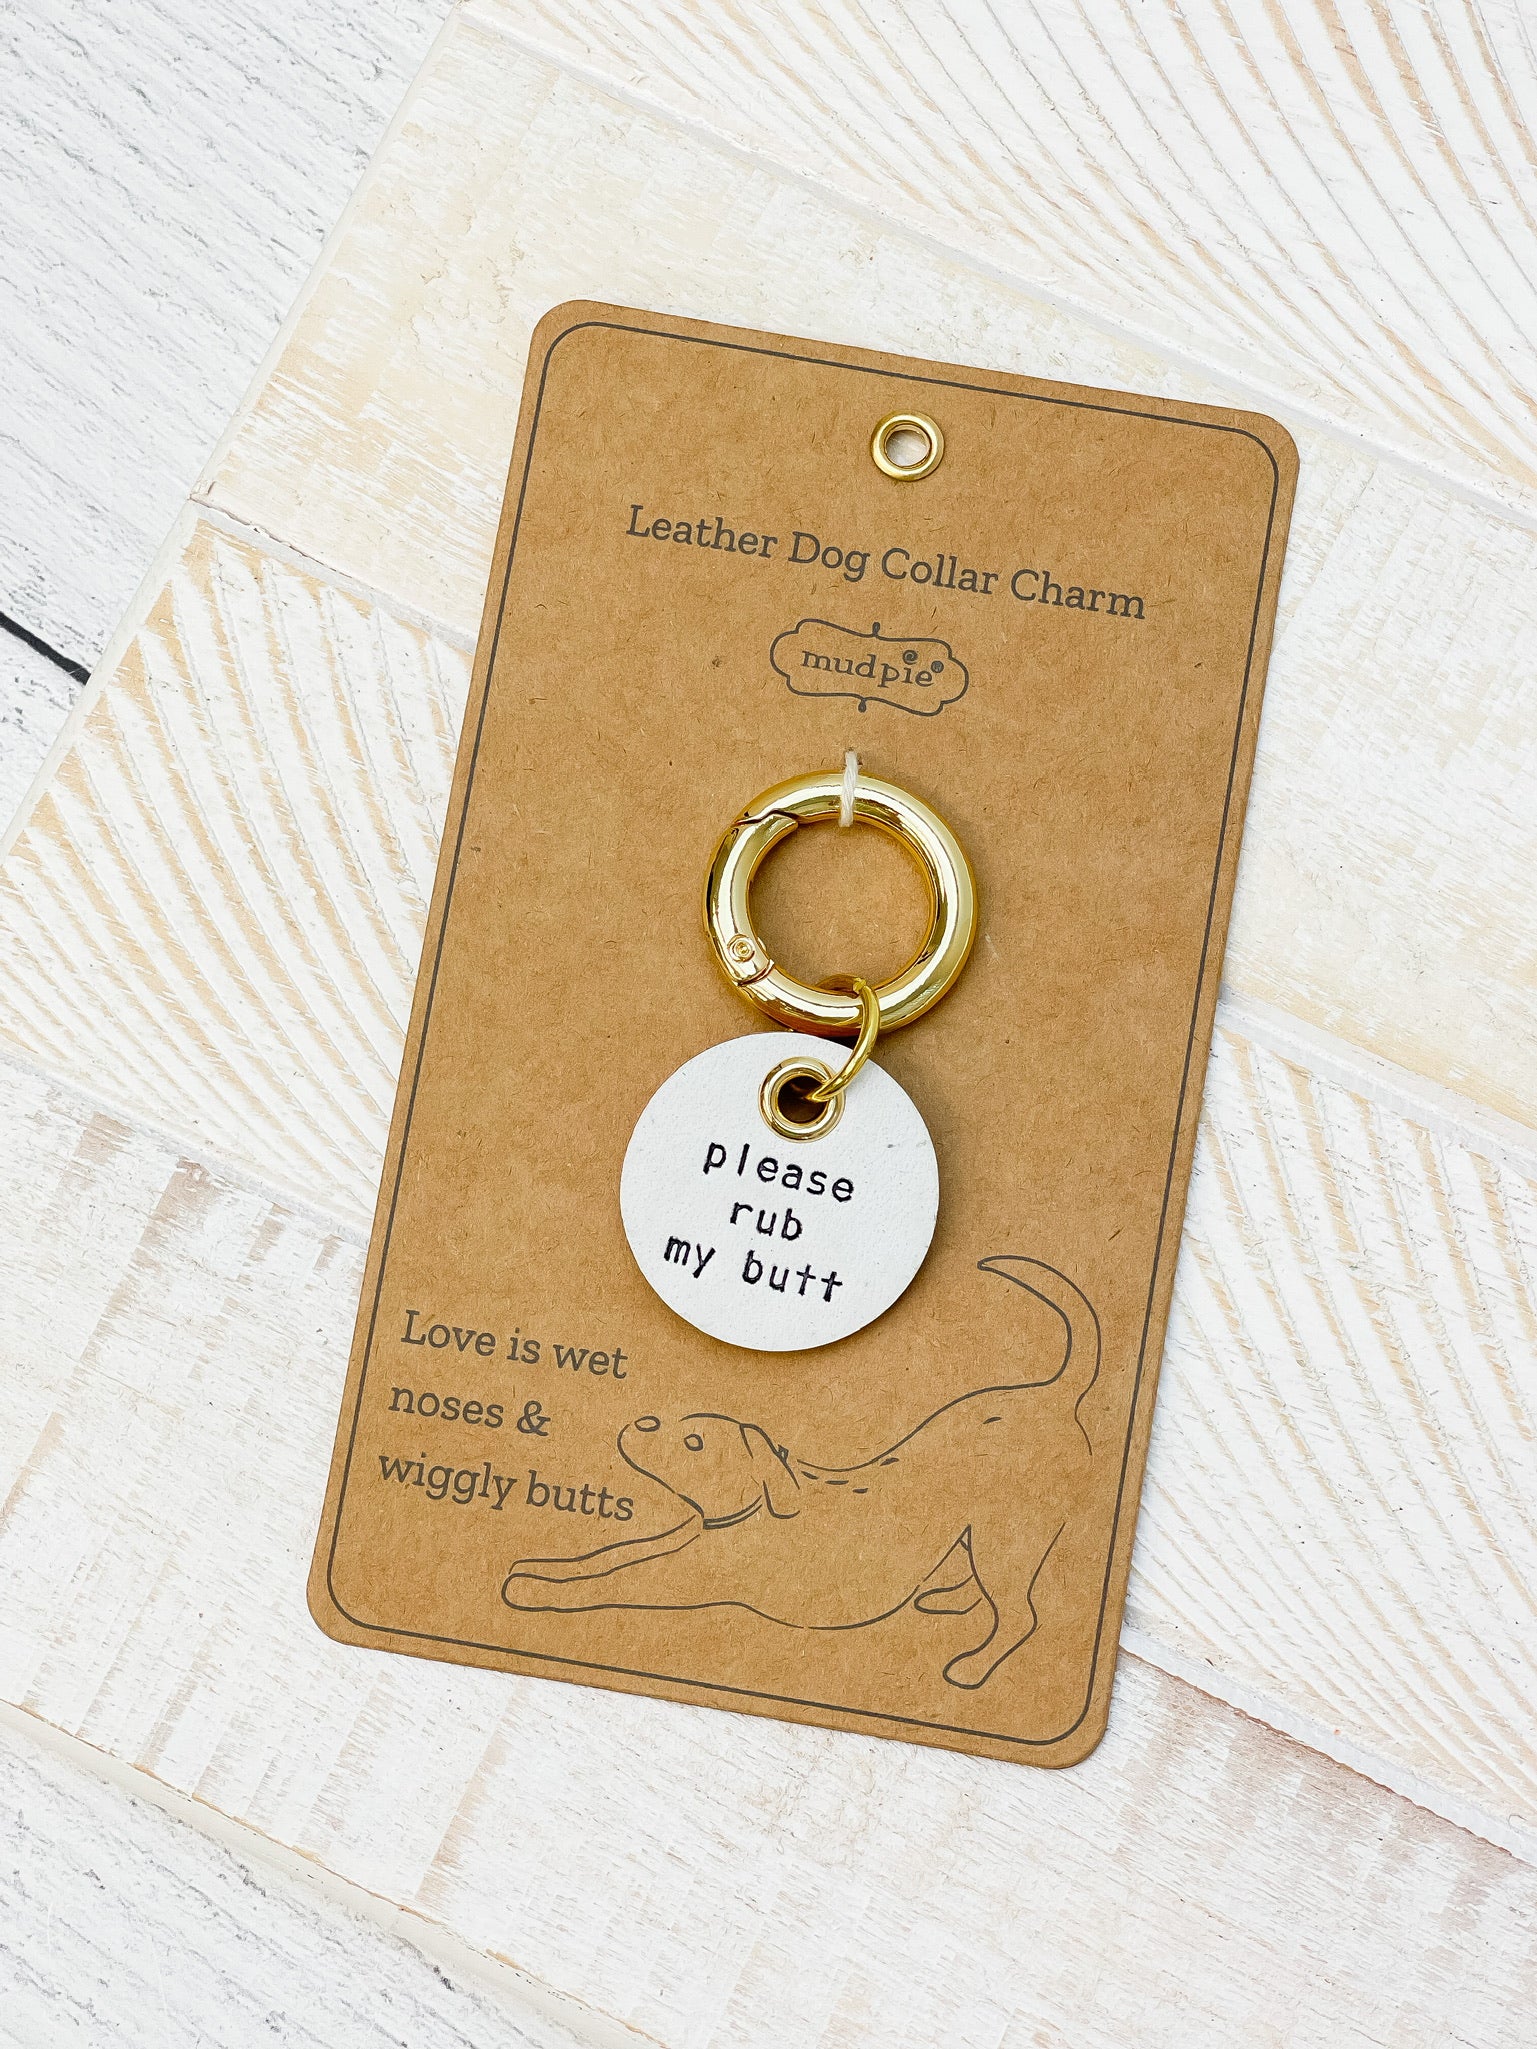 Dog Collar Charms by Mud Pie